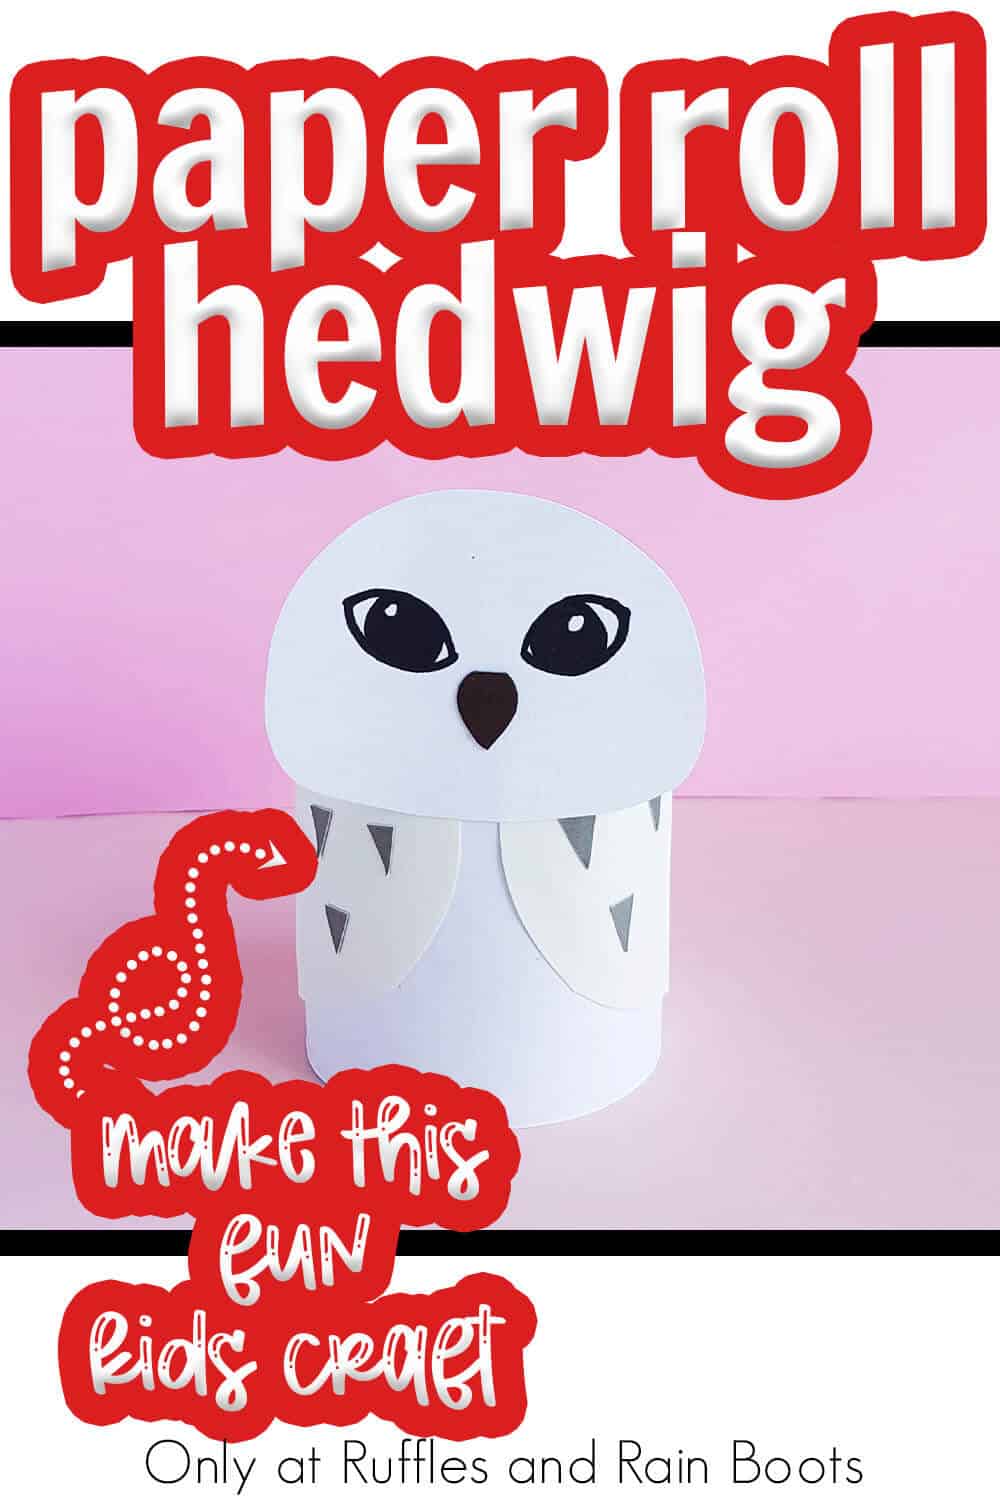 paper craft for kids hedwig owl from harry potter with text which reads paper roll hedwig make this fun kids craft